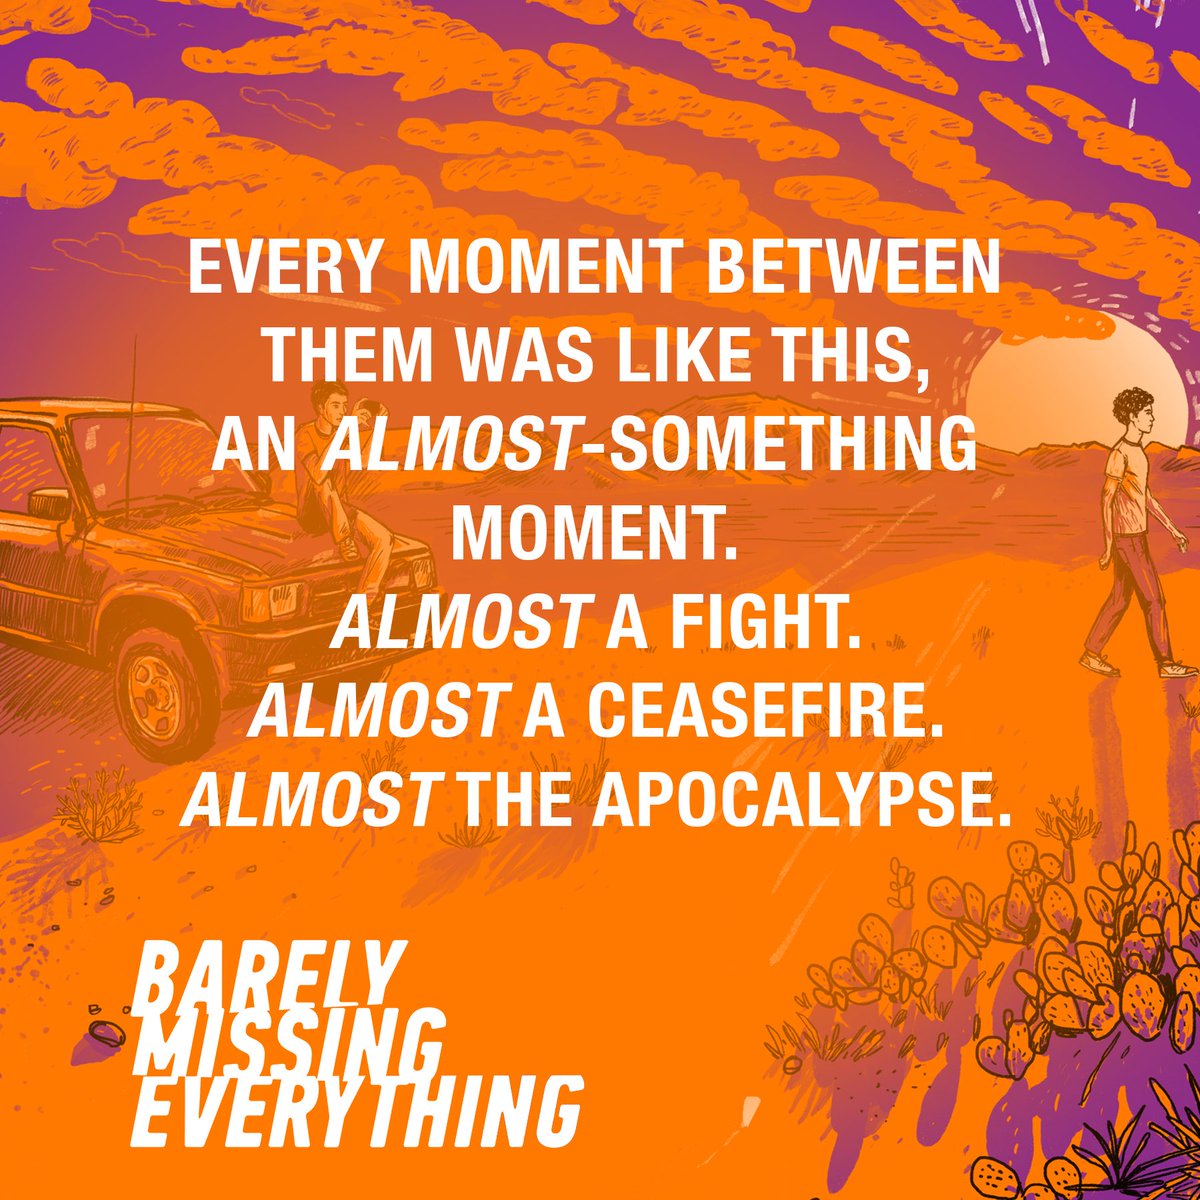 Less than a week to go until Barely Missing Everything hits the shelves! #Novel19s #YABooks #YA #ownvoices #authors #ElPaso #bookstagram #DiverseBooks #latinxkidlit #Latinxlit #Latinxwriters #Latinxwriters #LatinoBooks